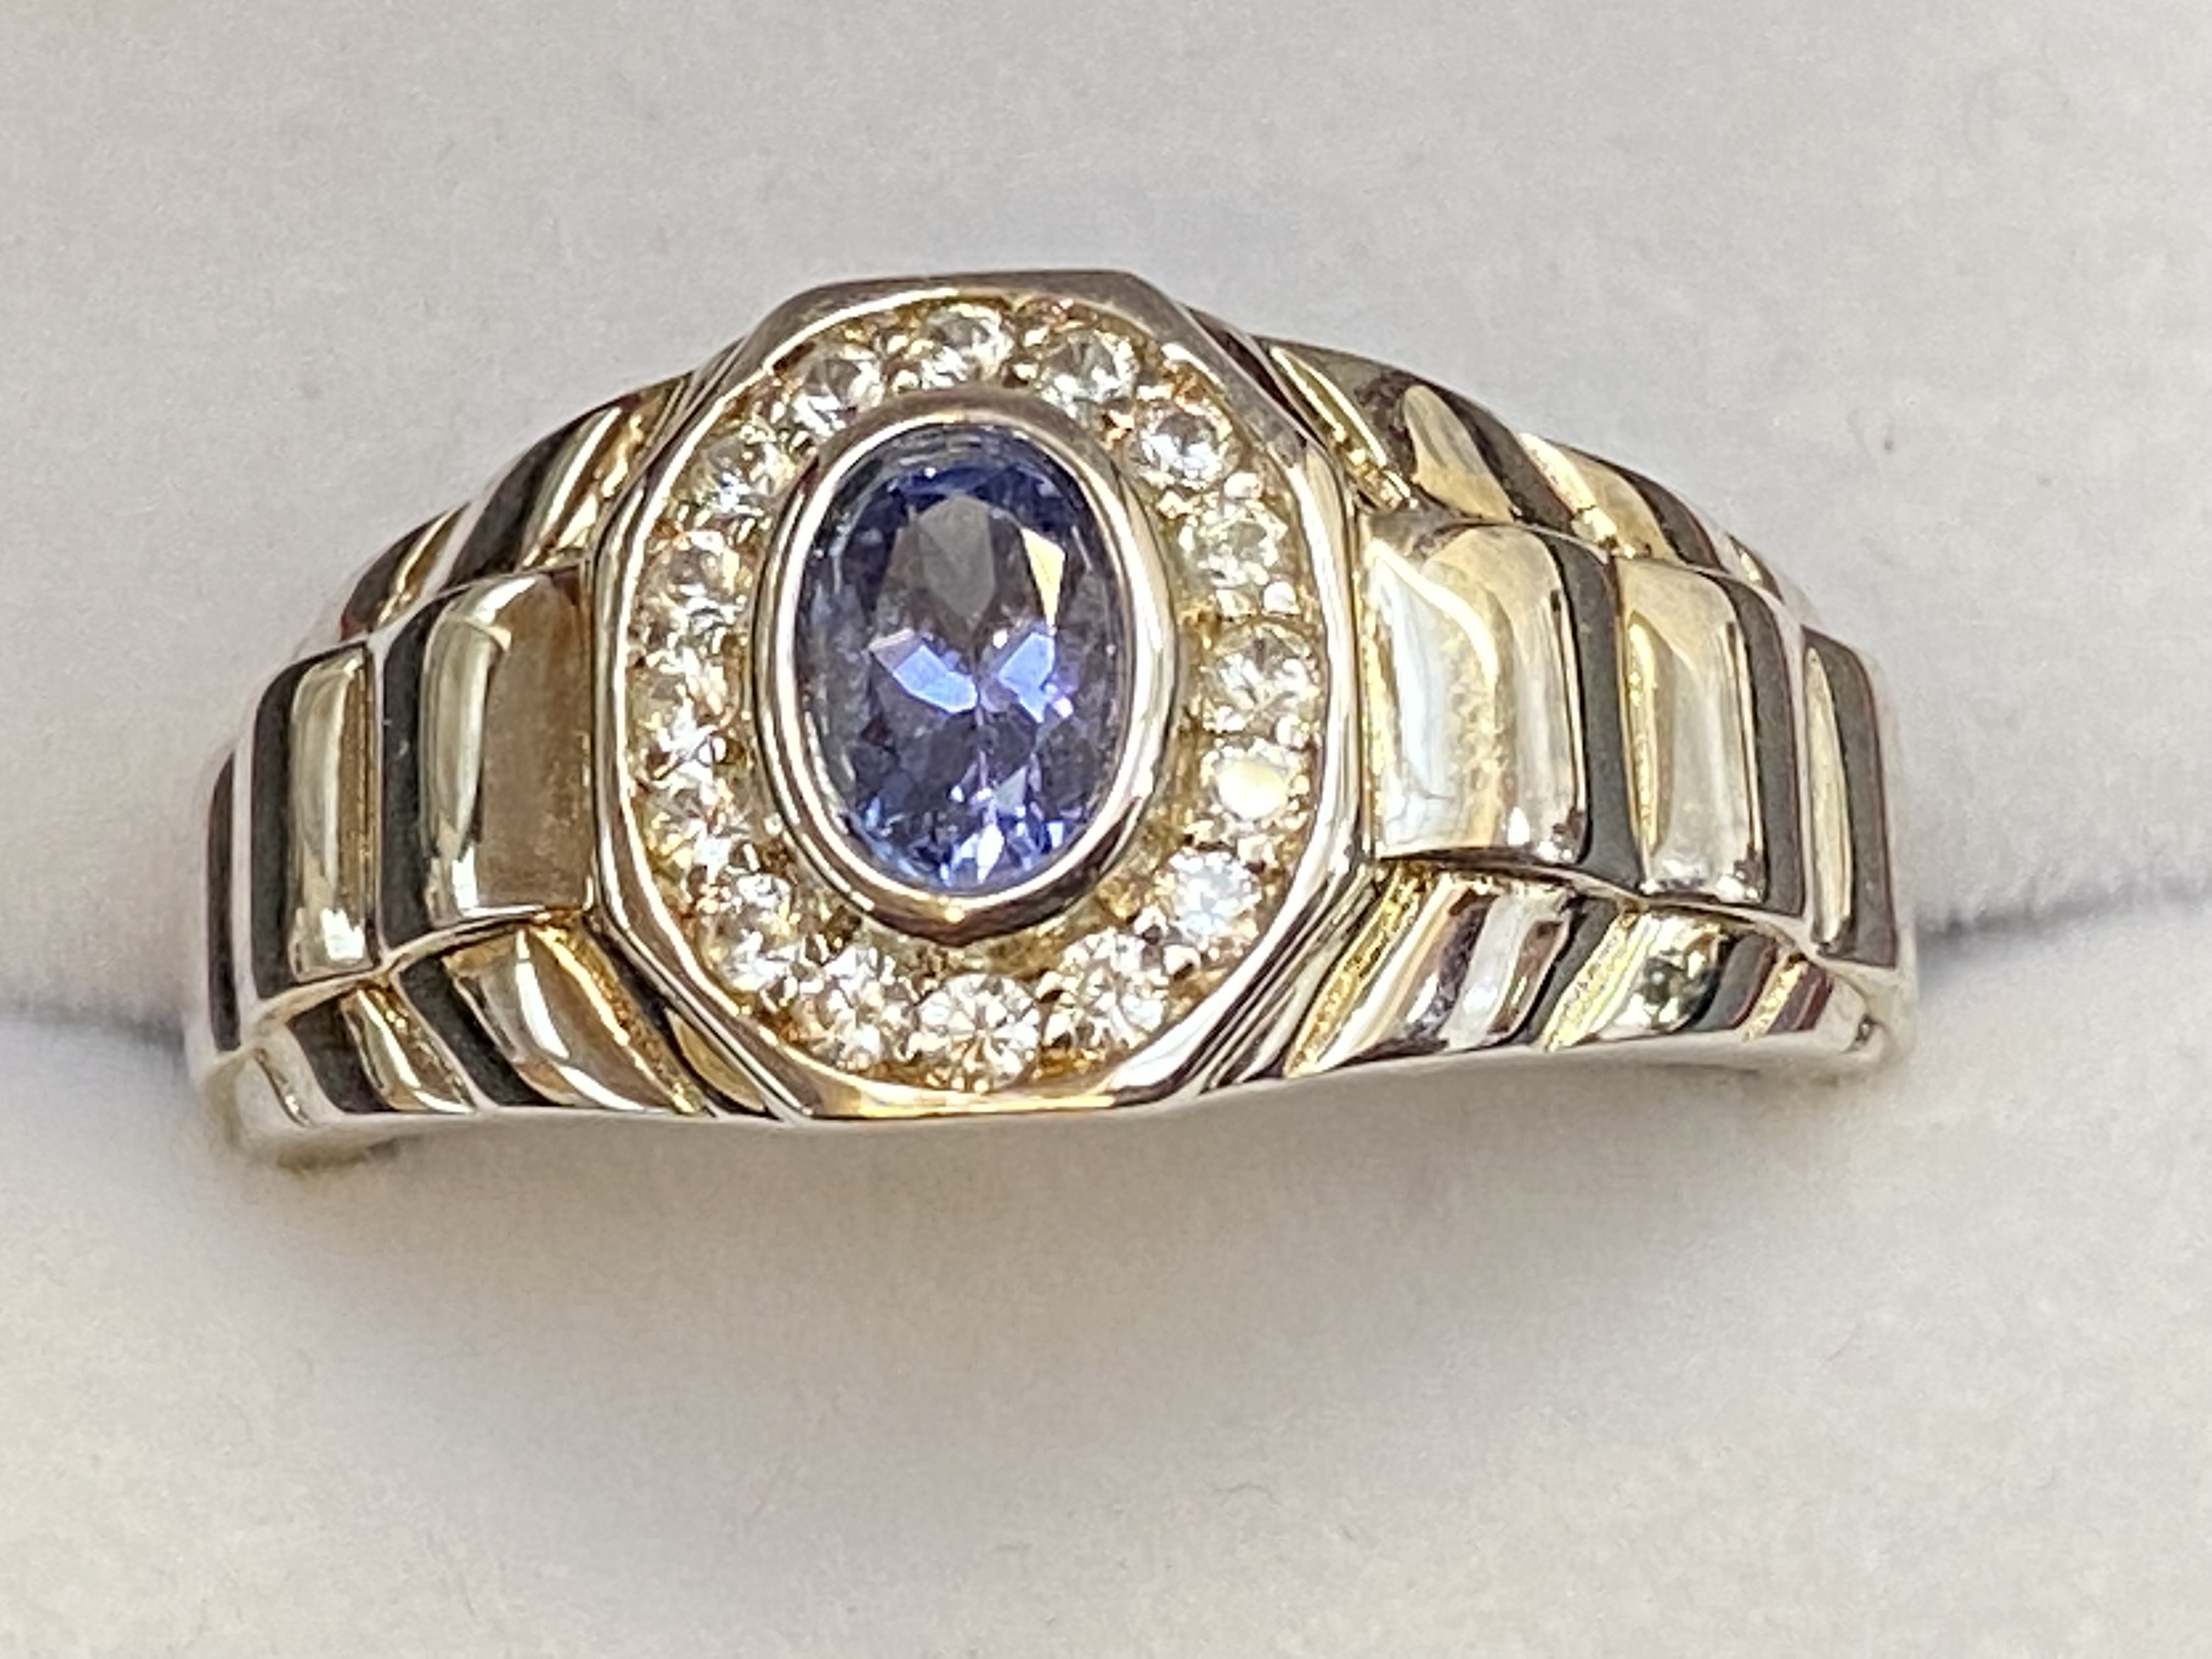 Gents silver ring with central tanzanite stone